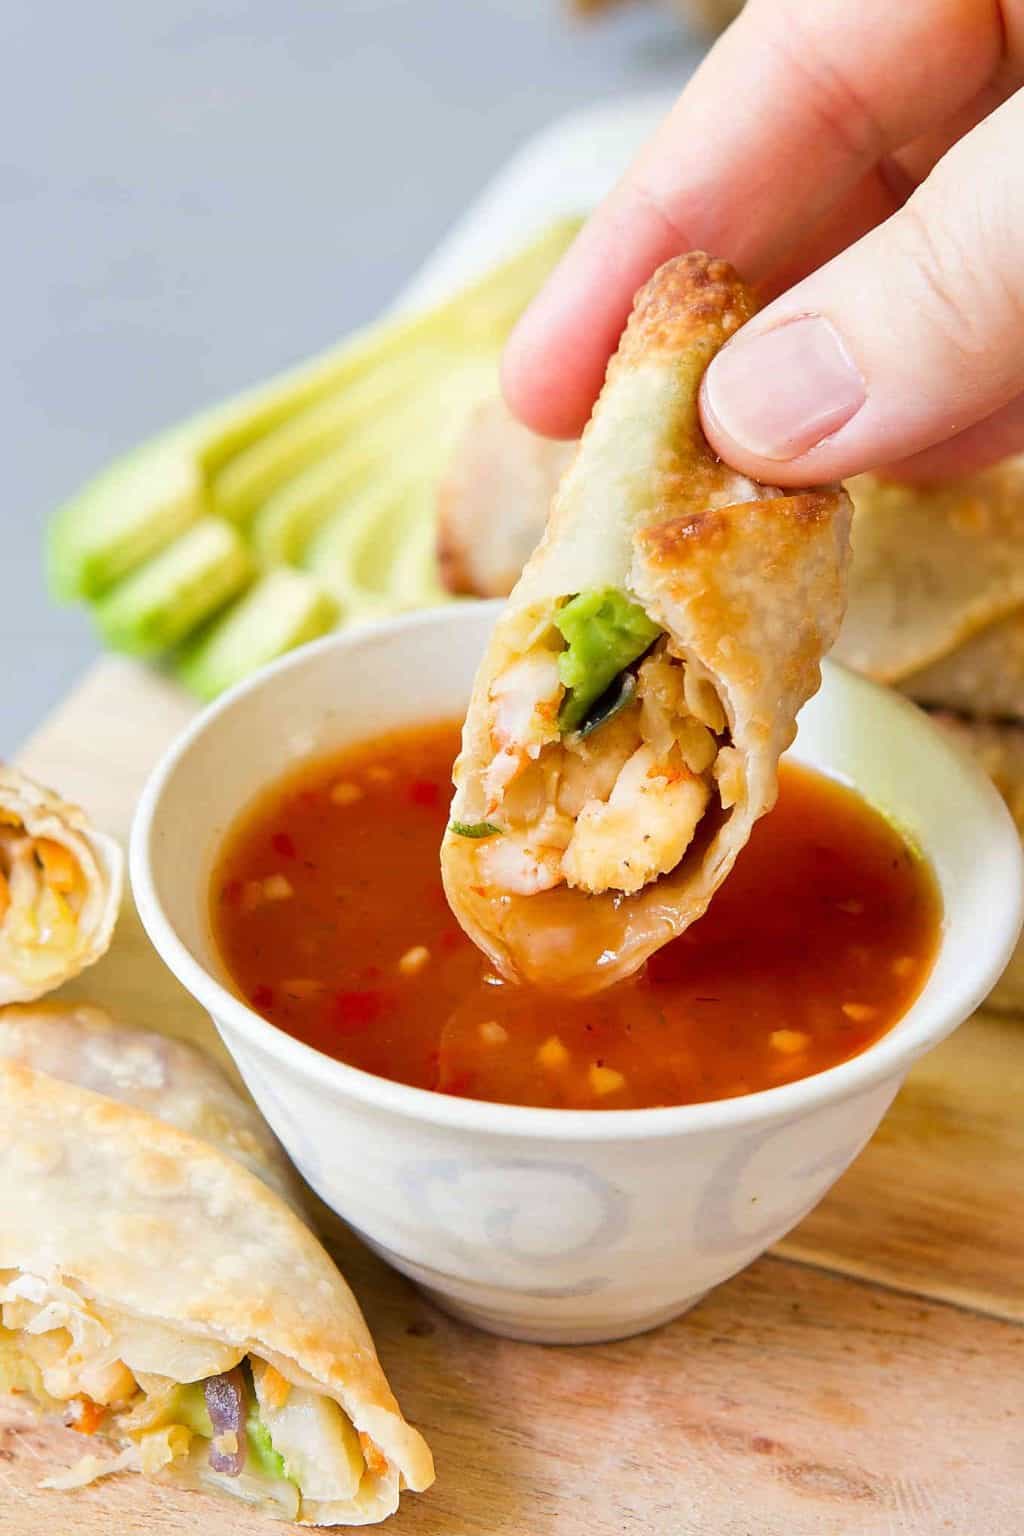 Half of a shrimp egg roll being dipped into a bowl of sweet chili sauce. Slices of avocado behind.